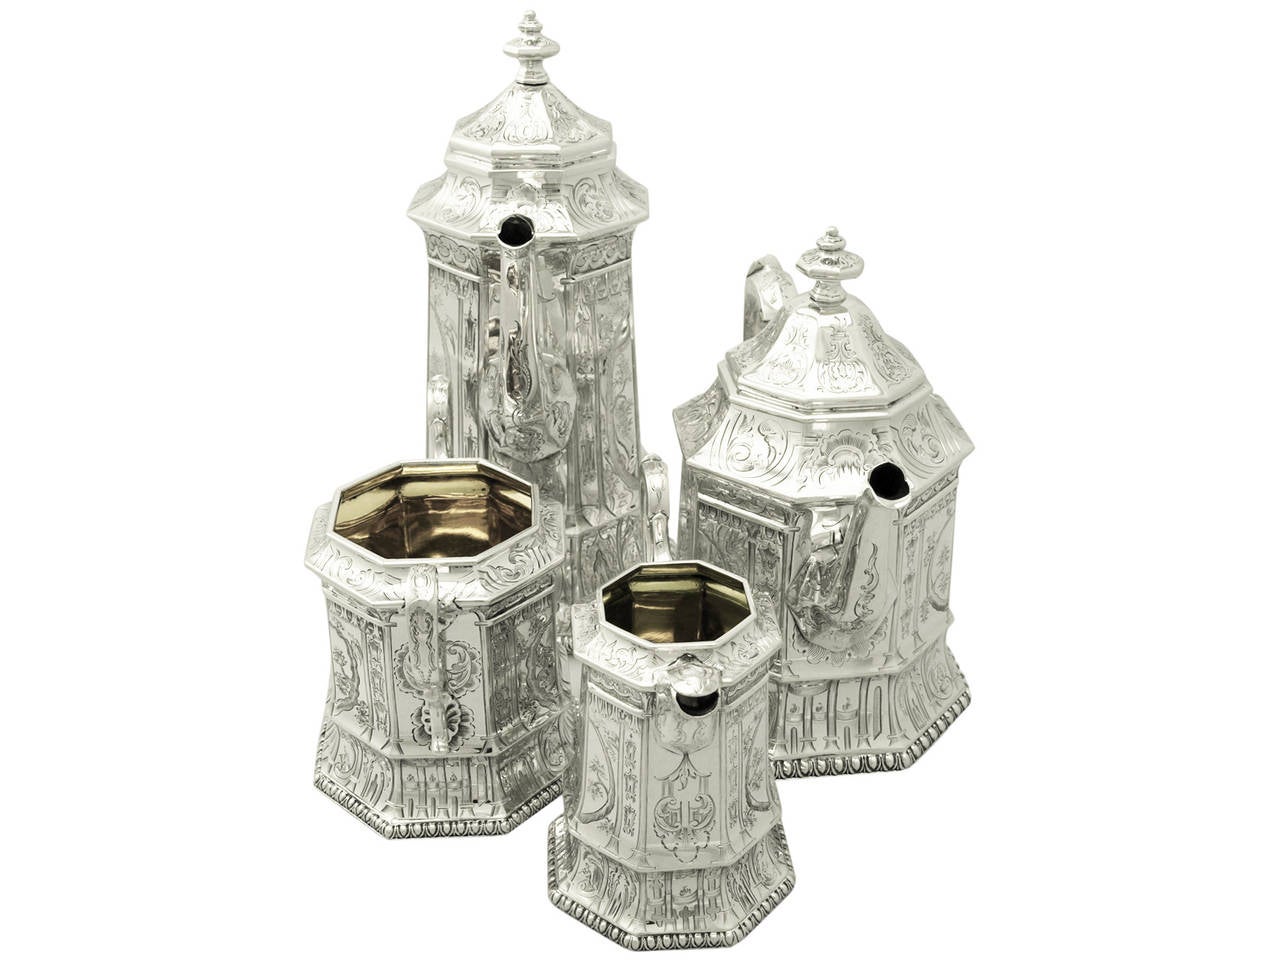 An exceptional, fine and impressive antique Victorian English sterling silver four piece tea and coffee service / set made by Joseph Angell II; an addition to our silver teaware collection.

This exceptional antique Victorian sterling silver four